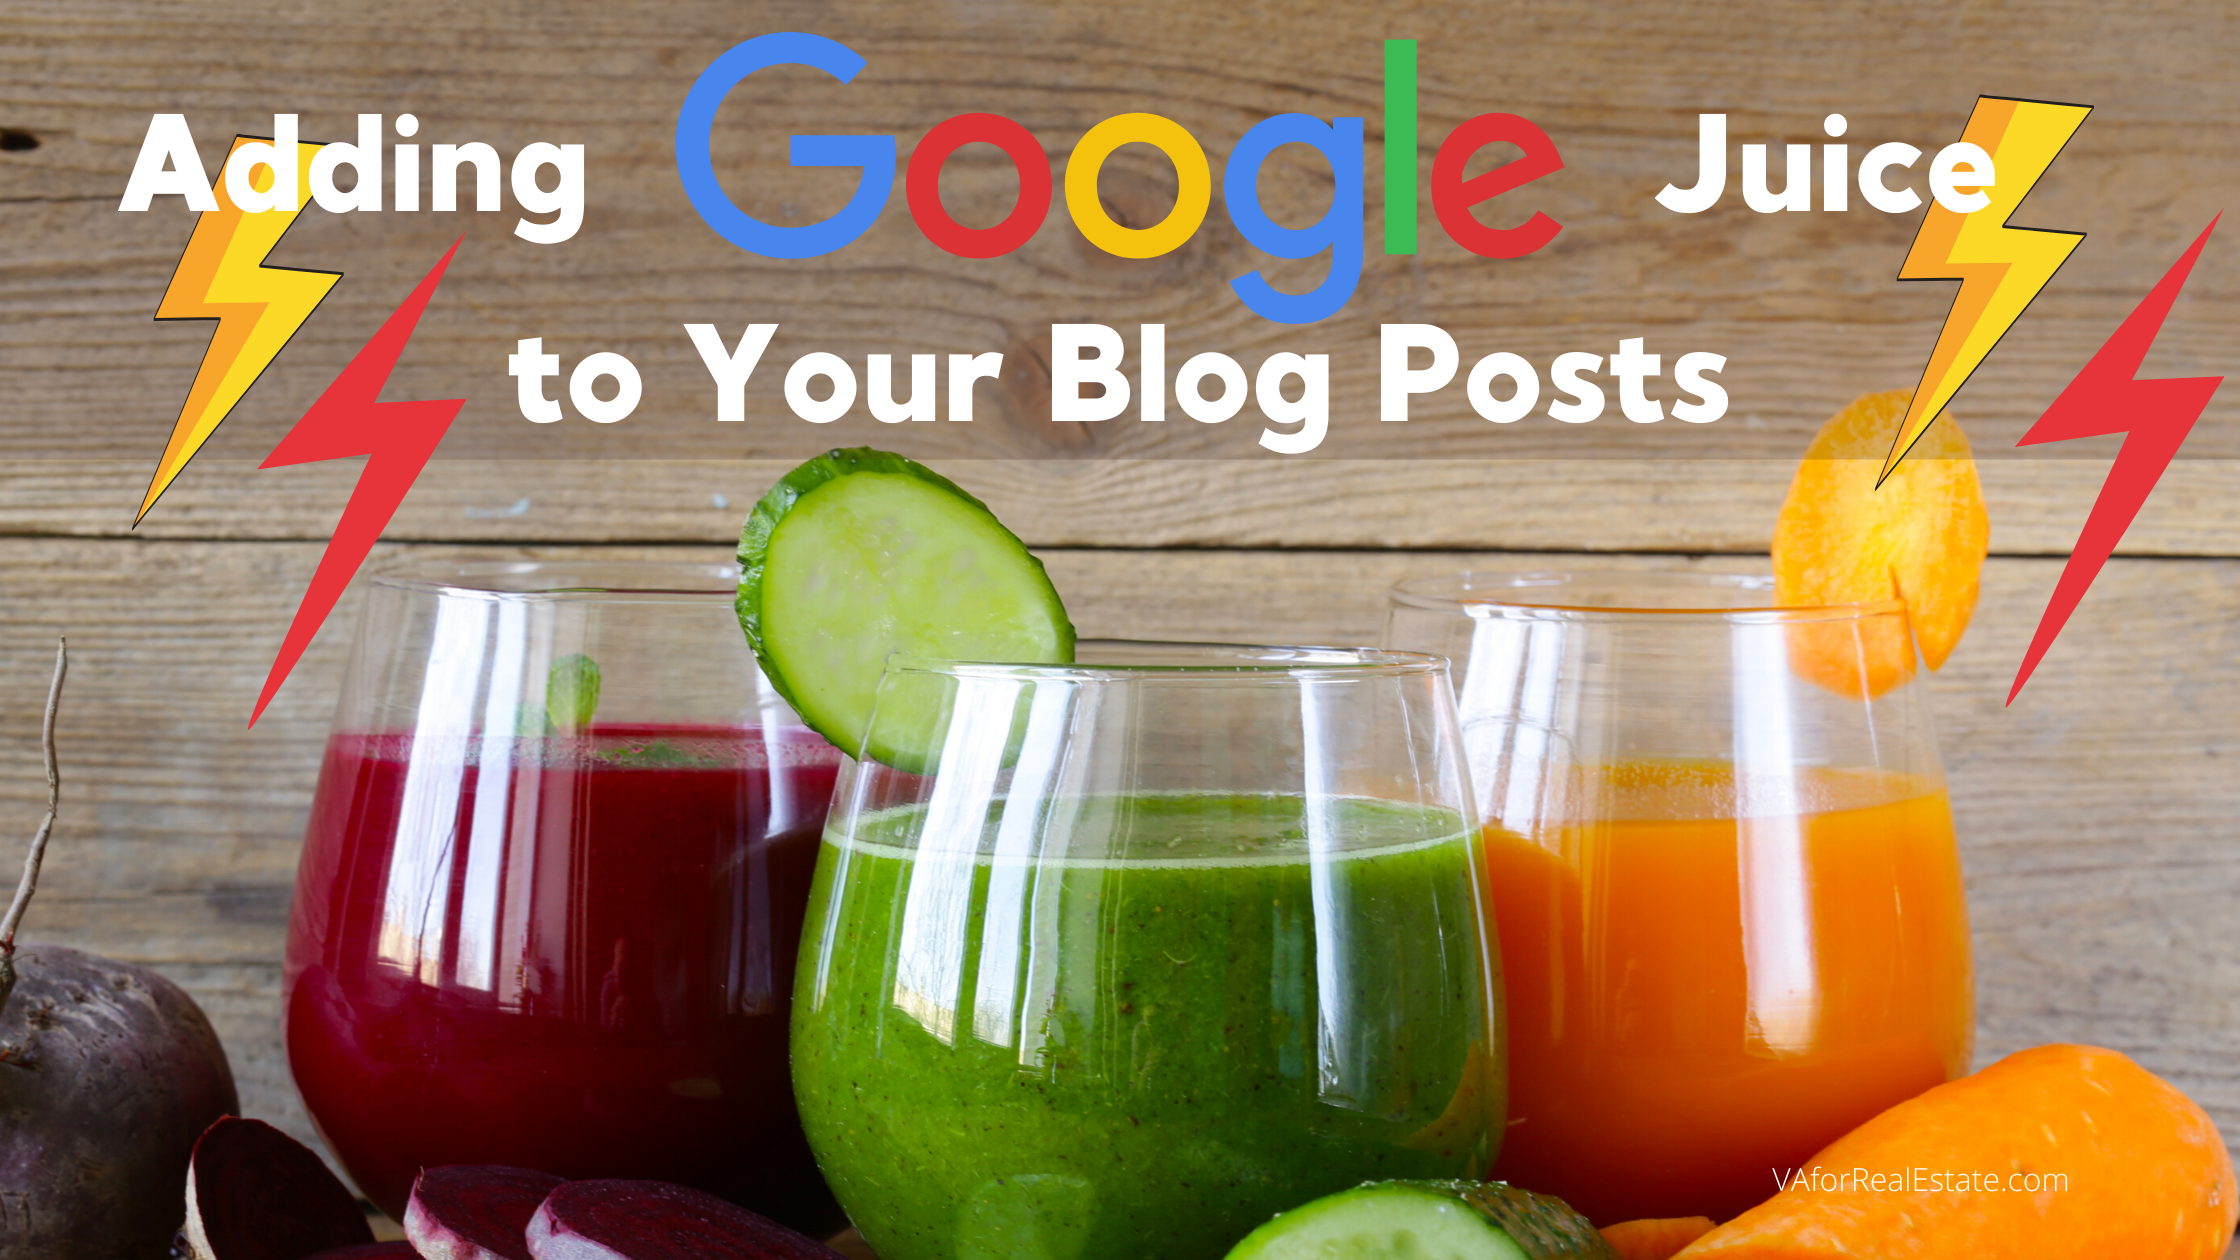 Add Google Juice to Your Blog Posts and Articles